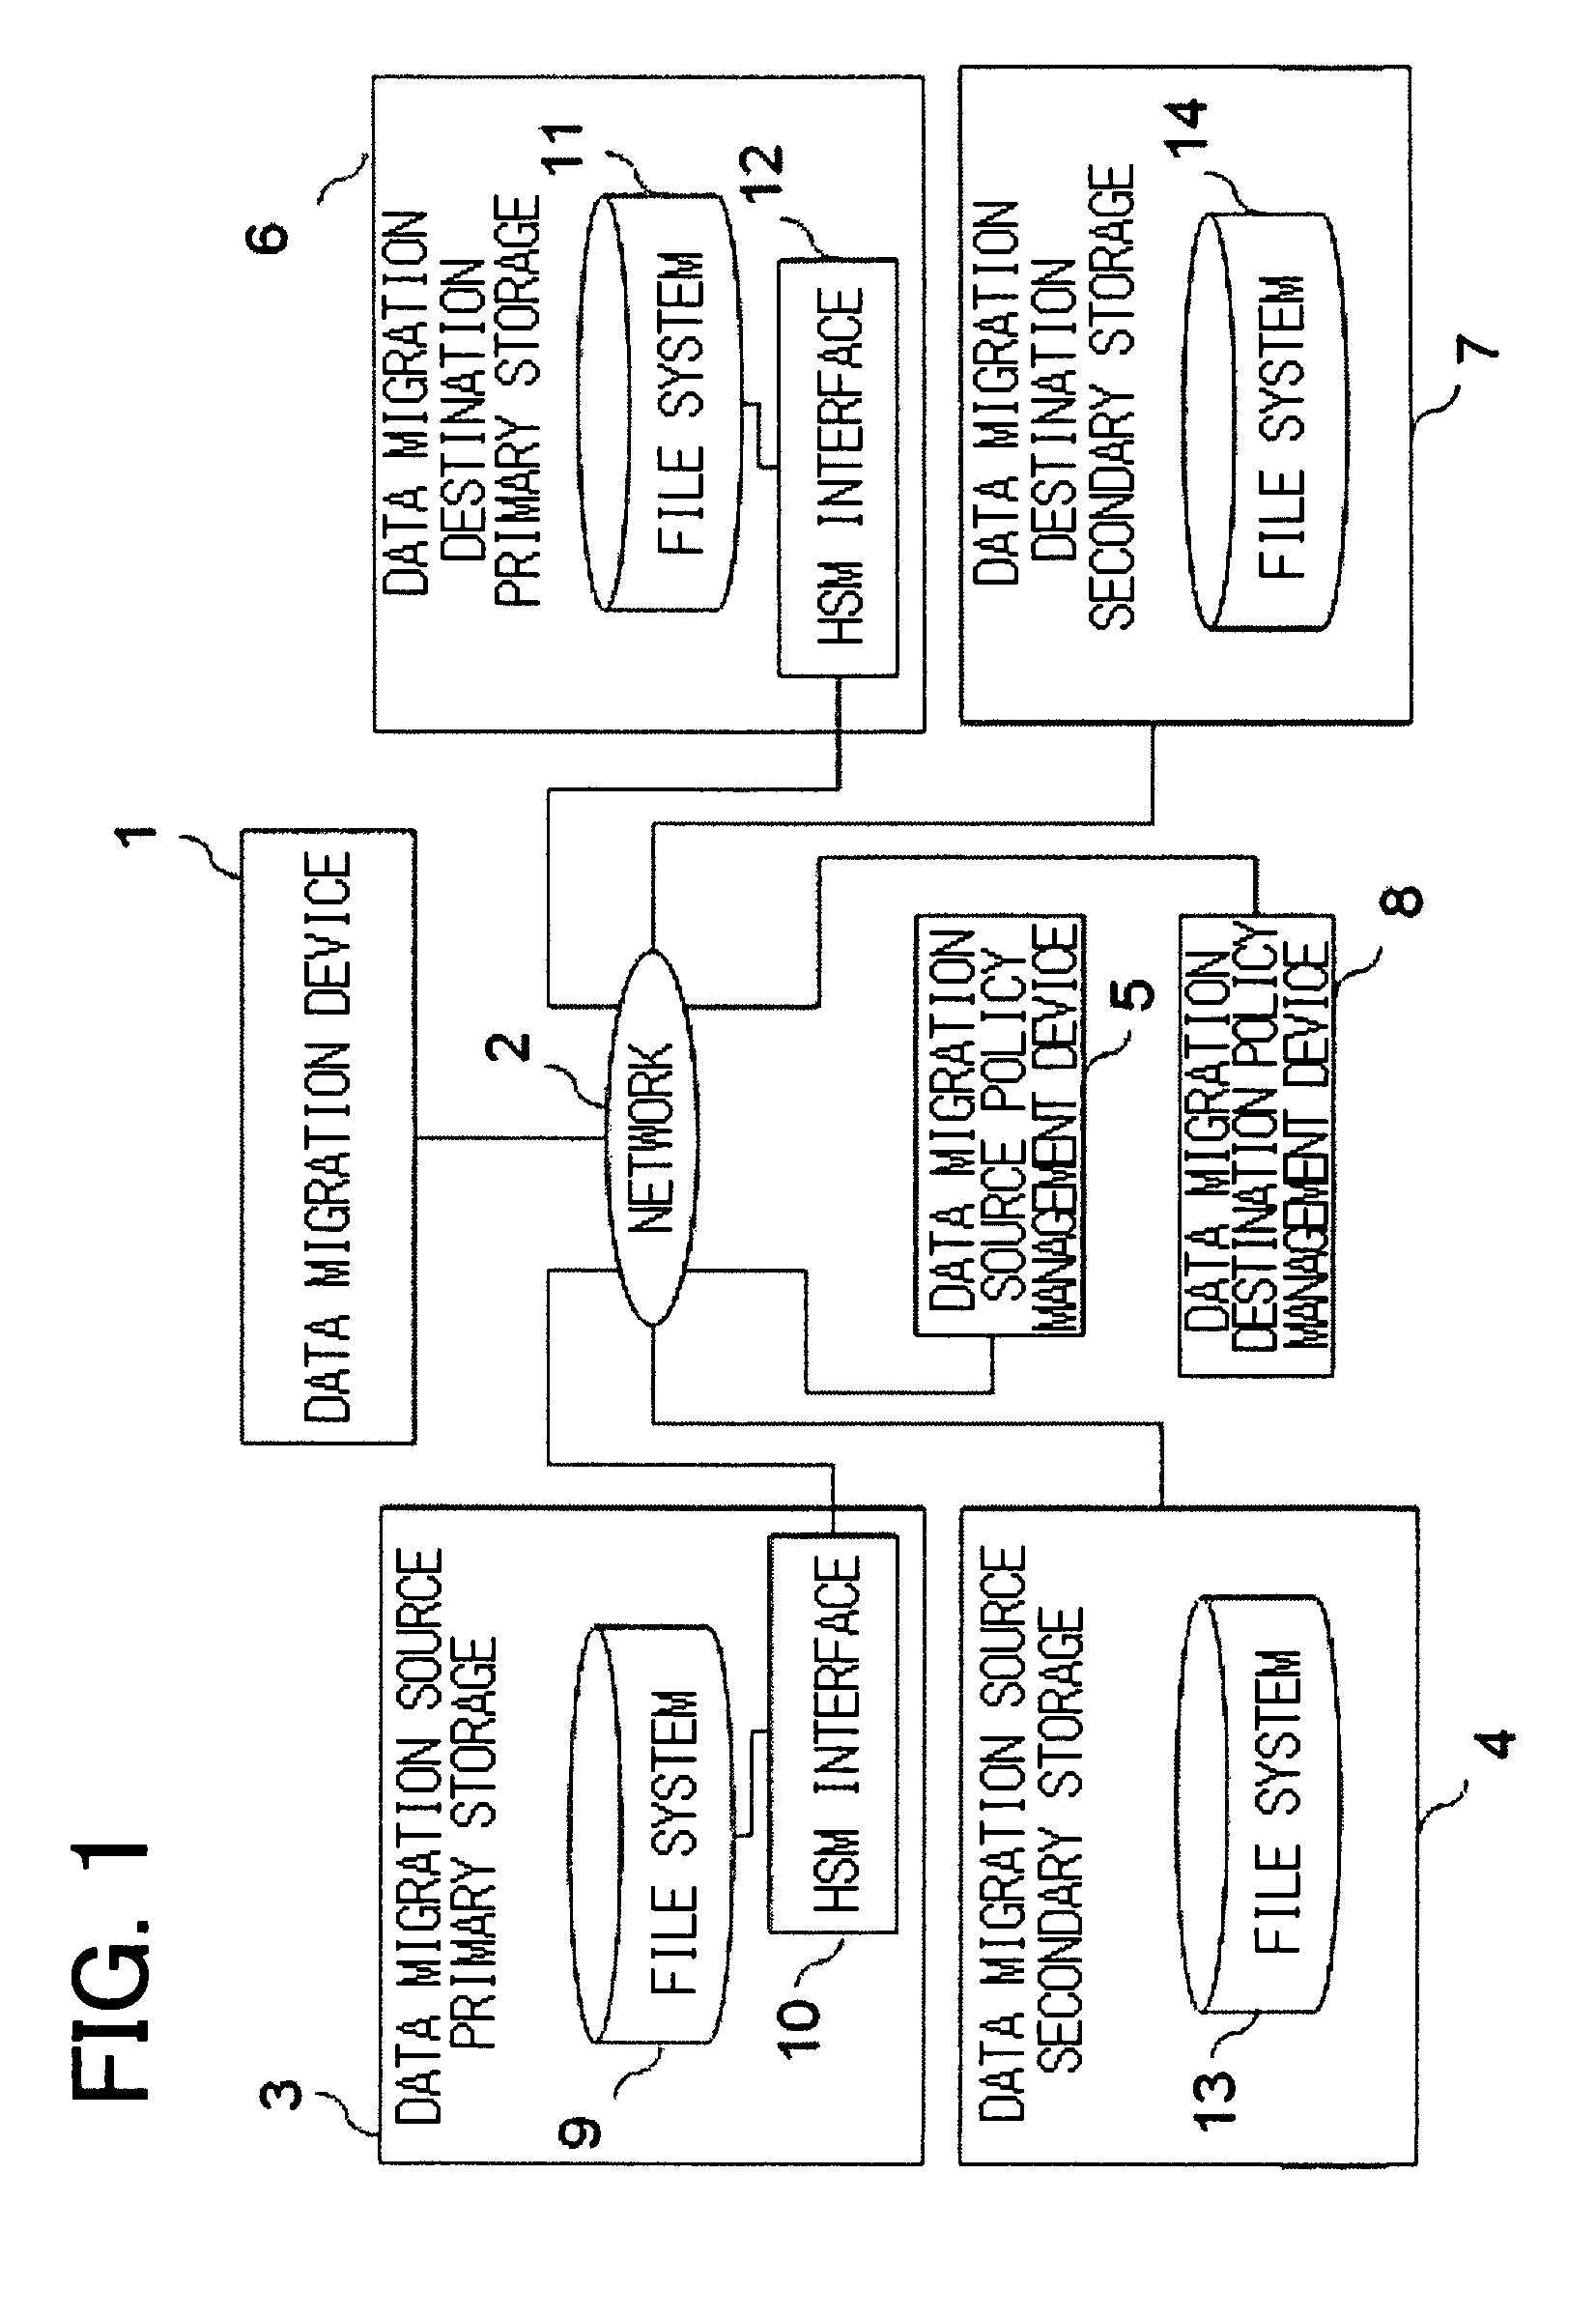 Data migration apparatus, method, and program for data stored in a distributed manner